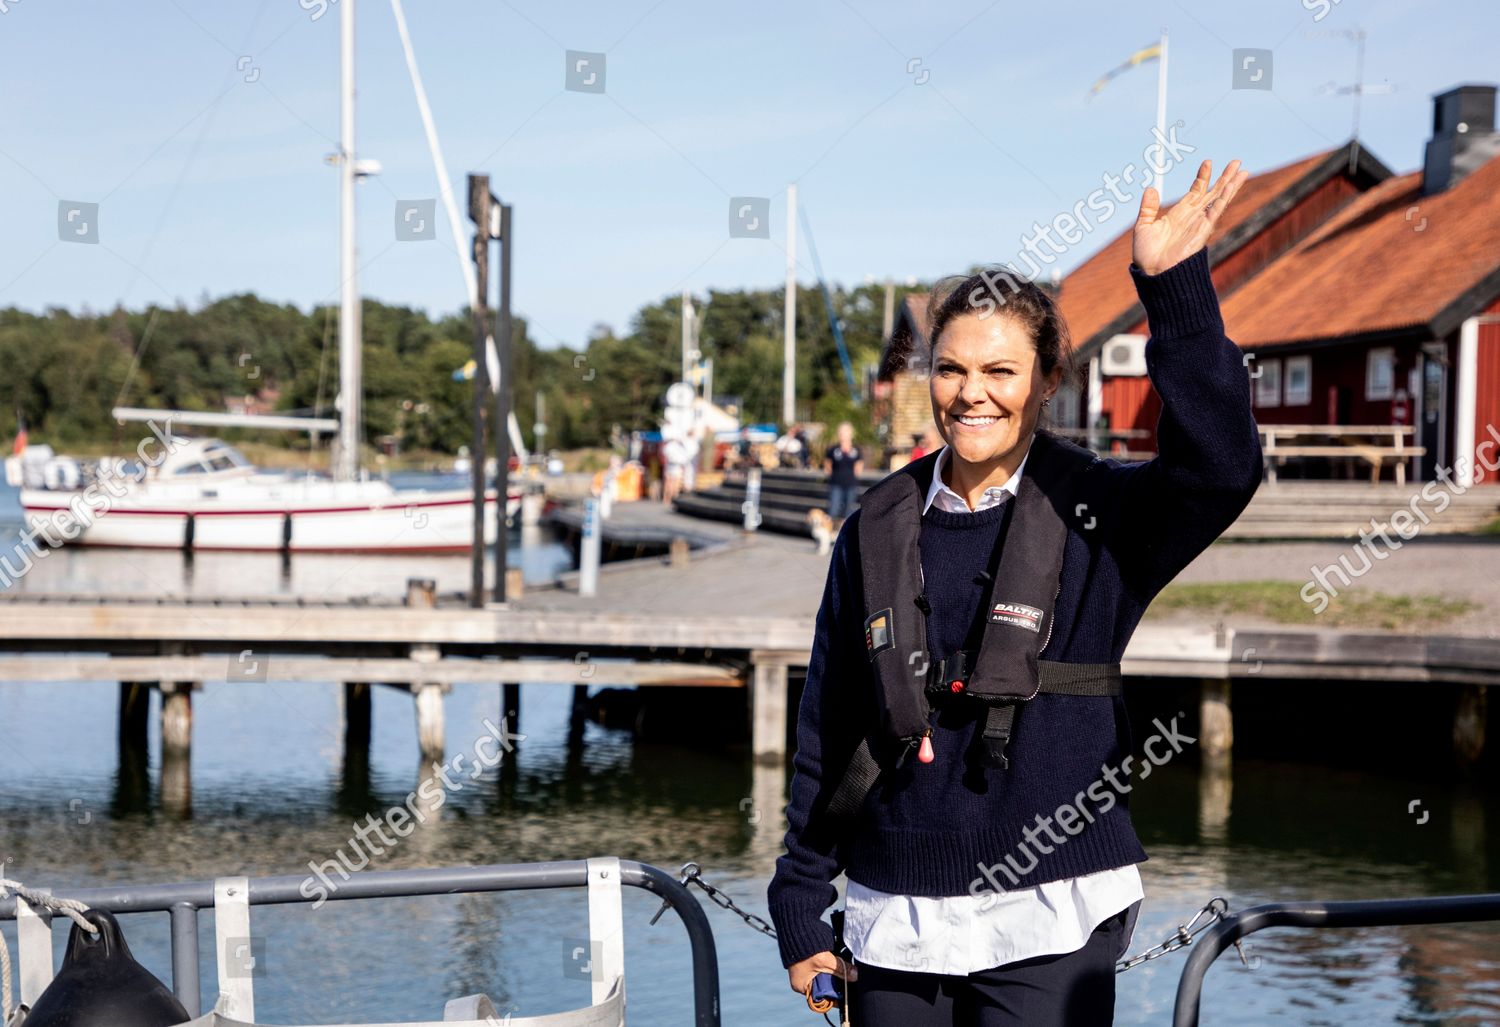 crown-princess-victoria-and-her-dog-rio-visit-alo-and-uto-sweden-shutterstock-editorial-12361980az.jpg